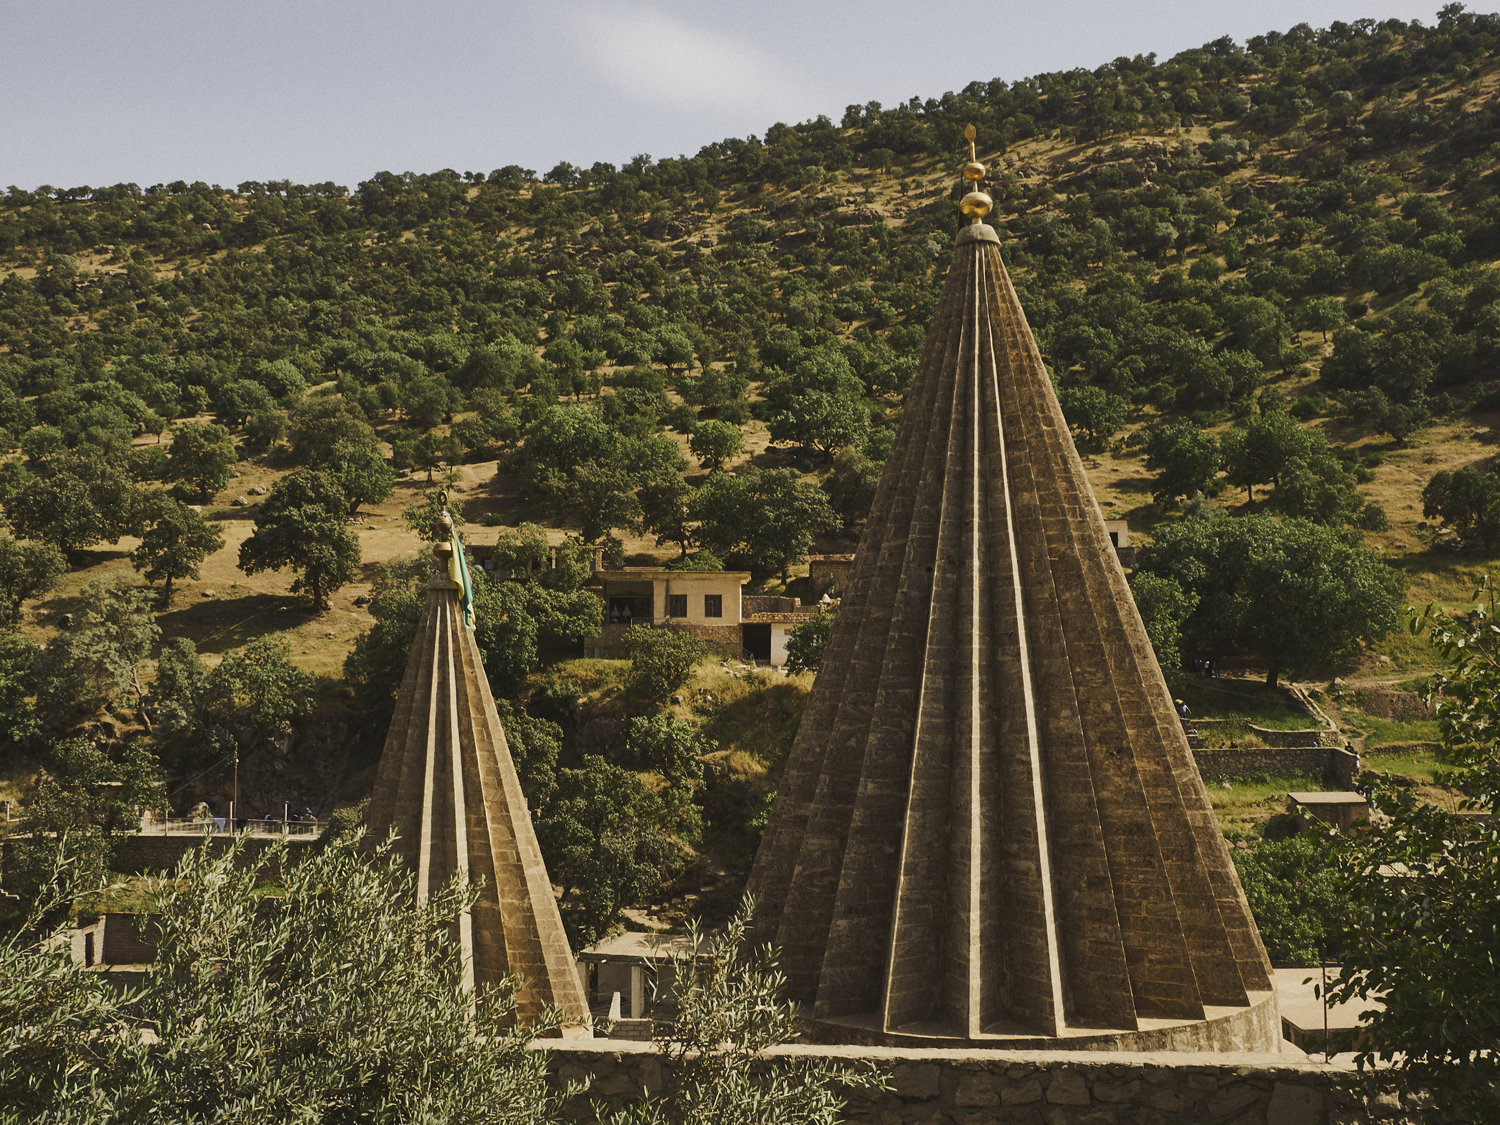 Lalish, Northern Iraq. Approximately 36 miles north of Mosul, Lalish temple is considered the Yazidi community's holiest site. The conical towers of the temple house a 4000 year old spring, and are thought to represent the rays of the sun.